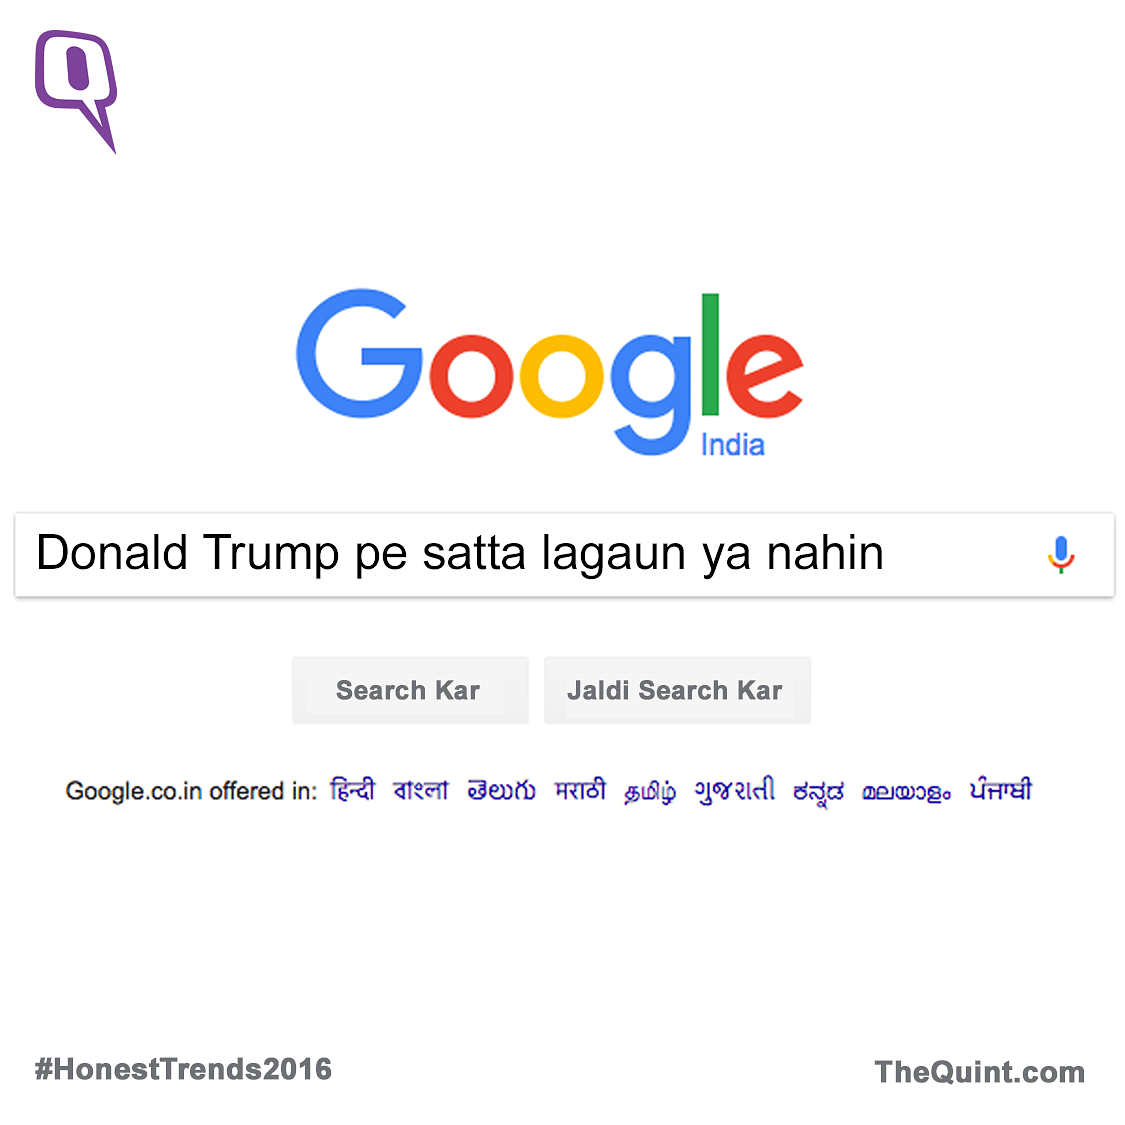 The official Google Trends data tell only half of the story, here’s an honest look at the complete picture. Agree?